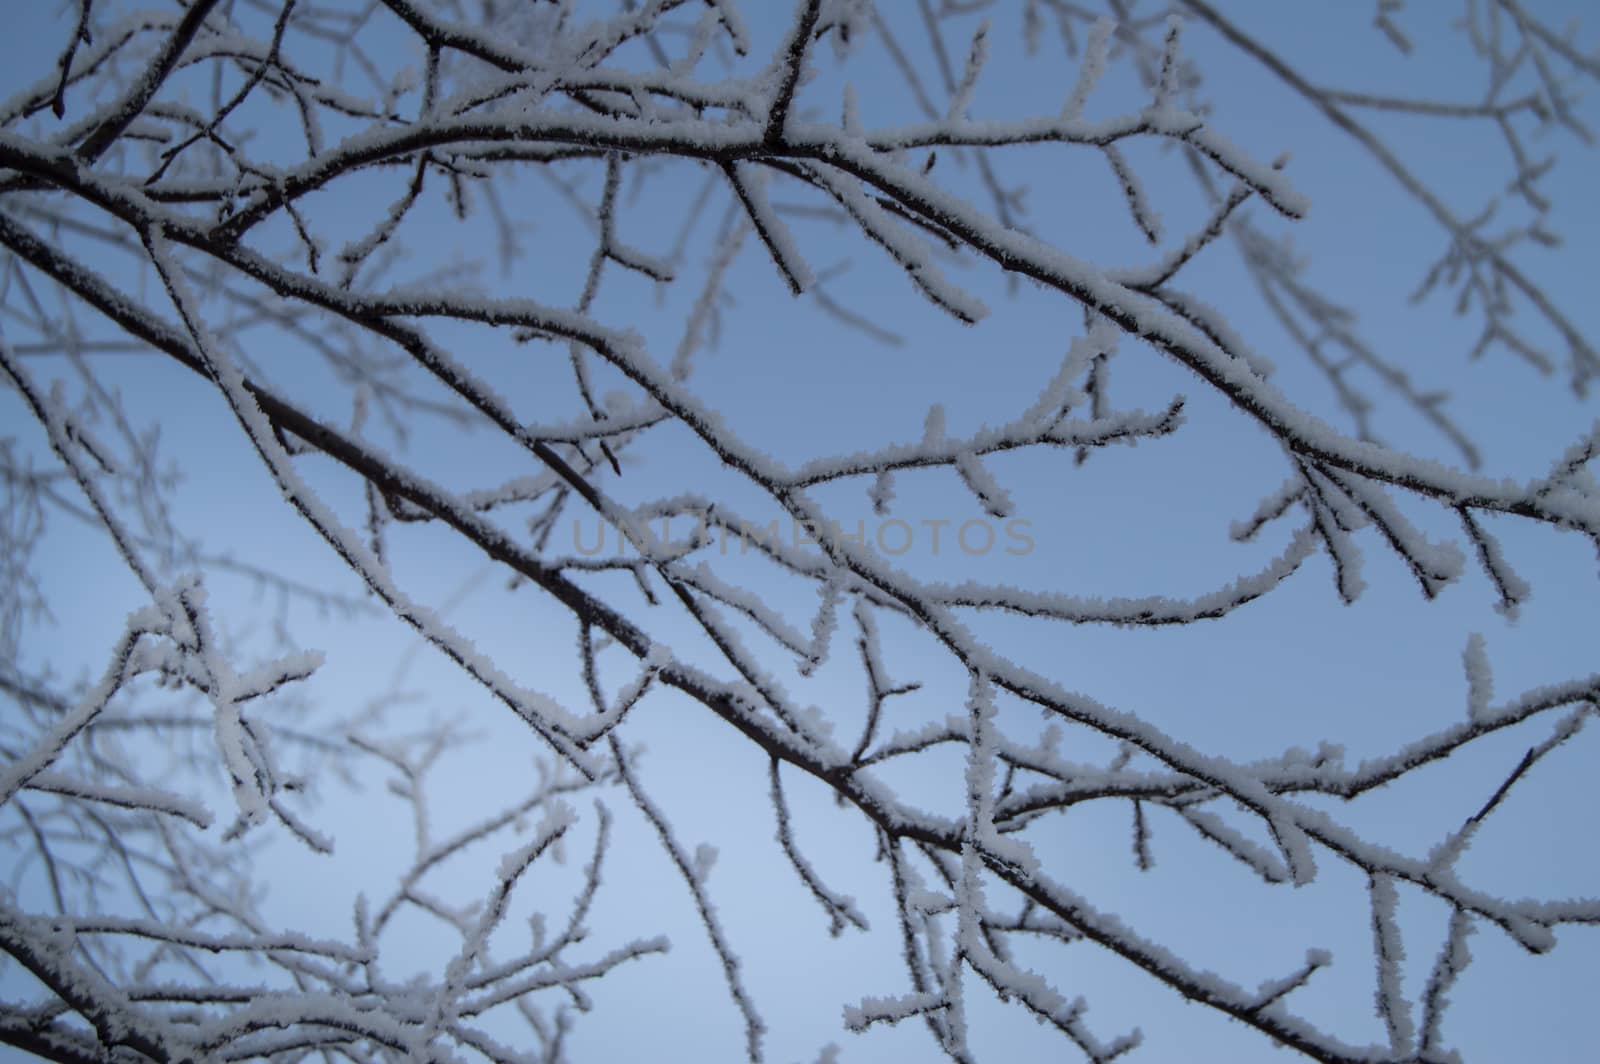 Closeup of the frost on the branches in winter Park, snow, sunset.